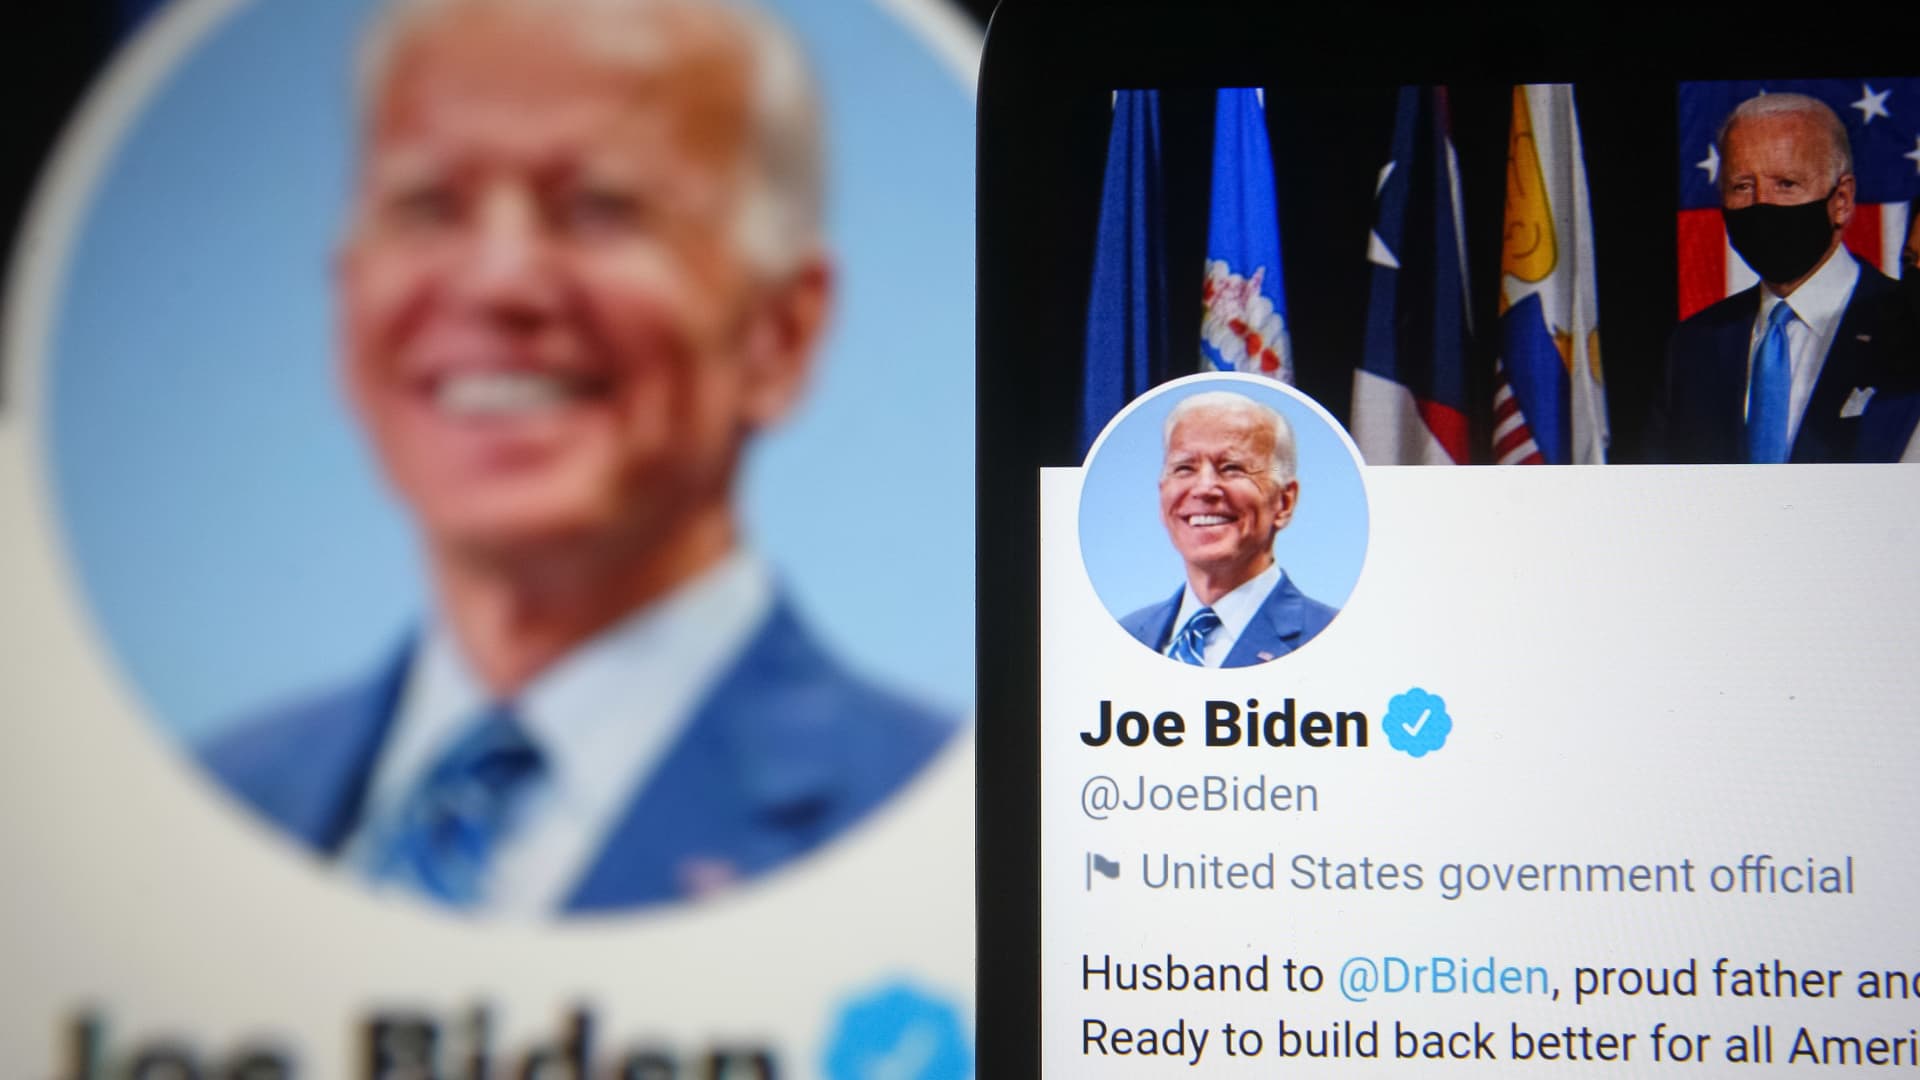 Twitter account of U.S. President Joe Biden is seen on a smartphone and a pc screen in the background.